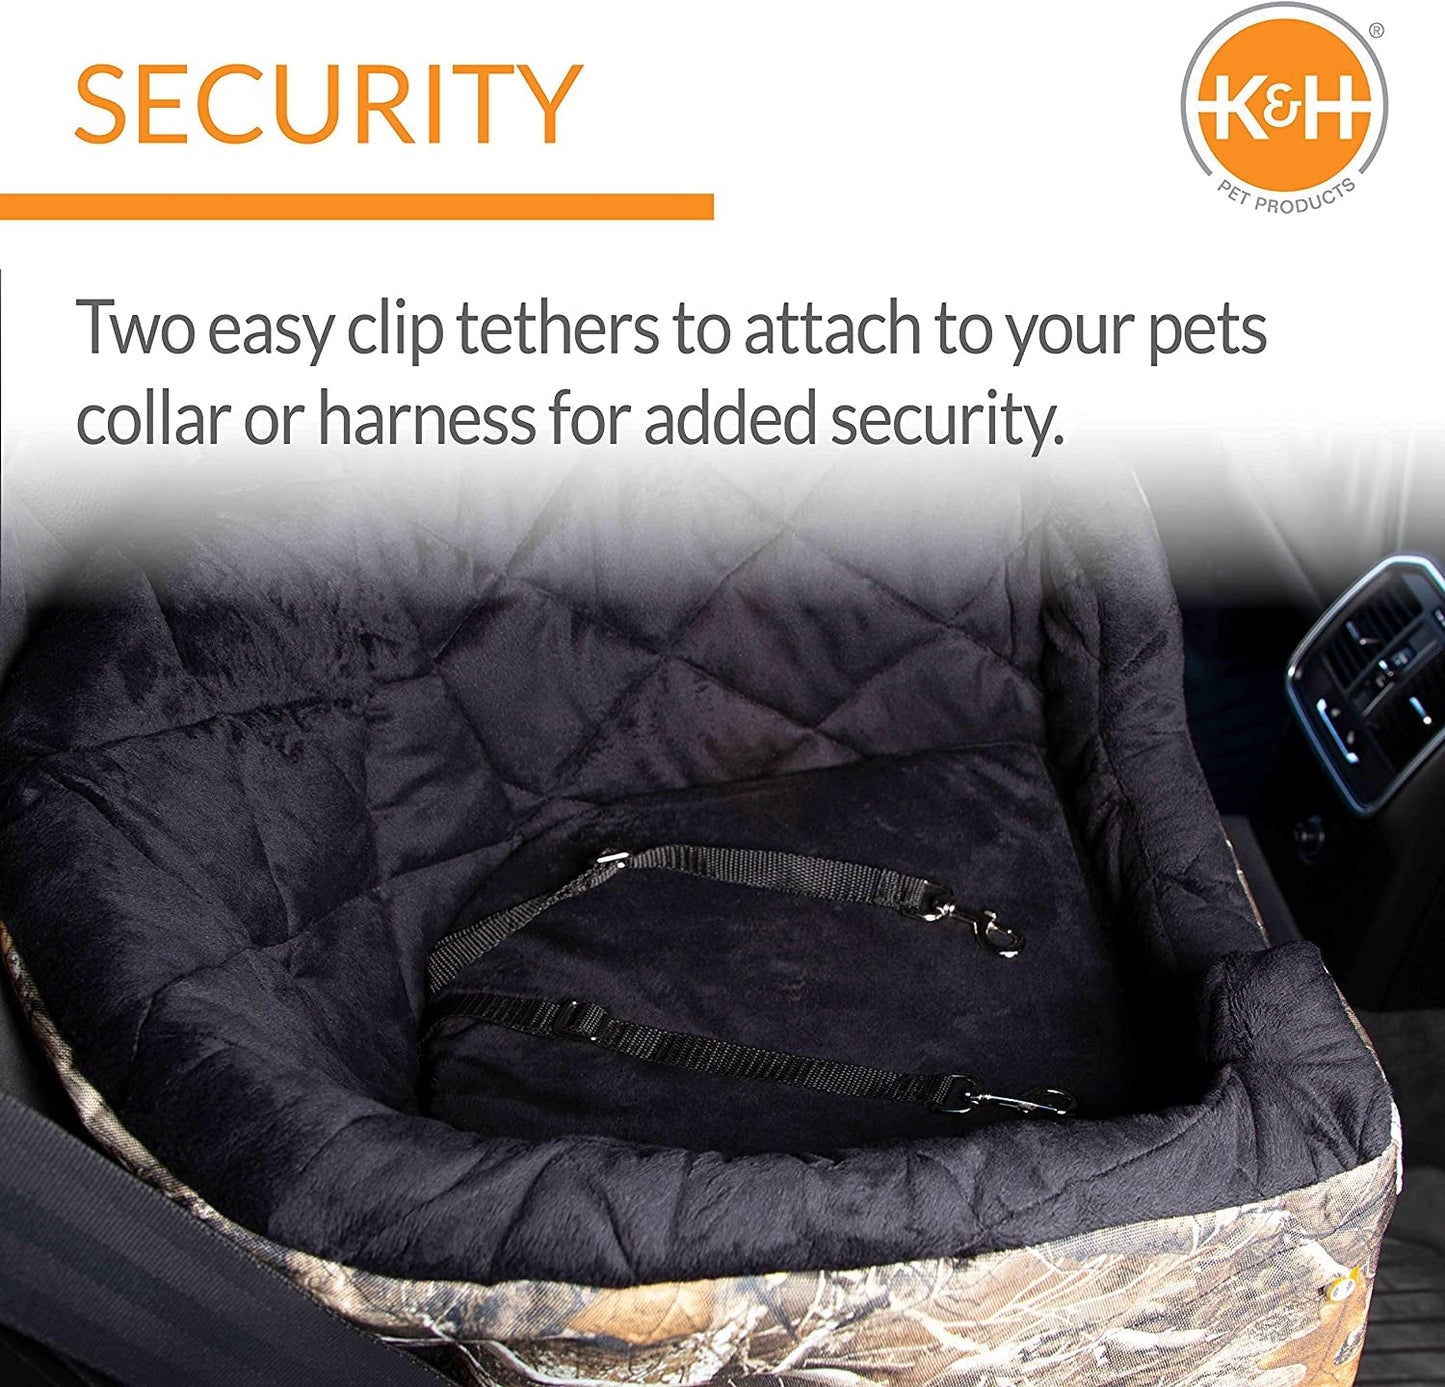 K&H Pet Products Bucket Booster Dog Car Seat with Dog Seat Belt for Car, Washable Small Dog Car Seat, Sturdy Dog Booster Seats for Small Dogs, Medium Dogs, 2 Safety Leashes, Large Realtree Edge Camo - PETGS